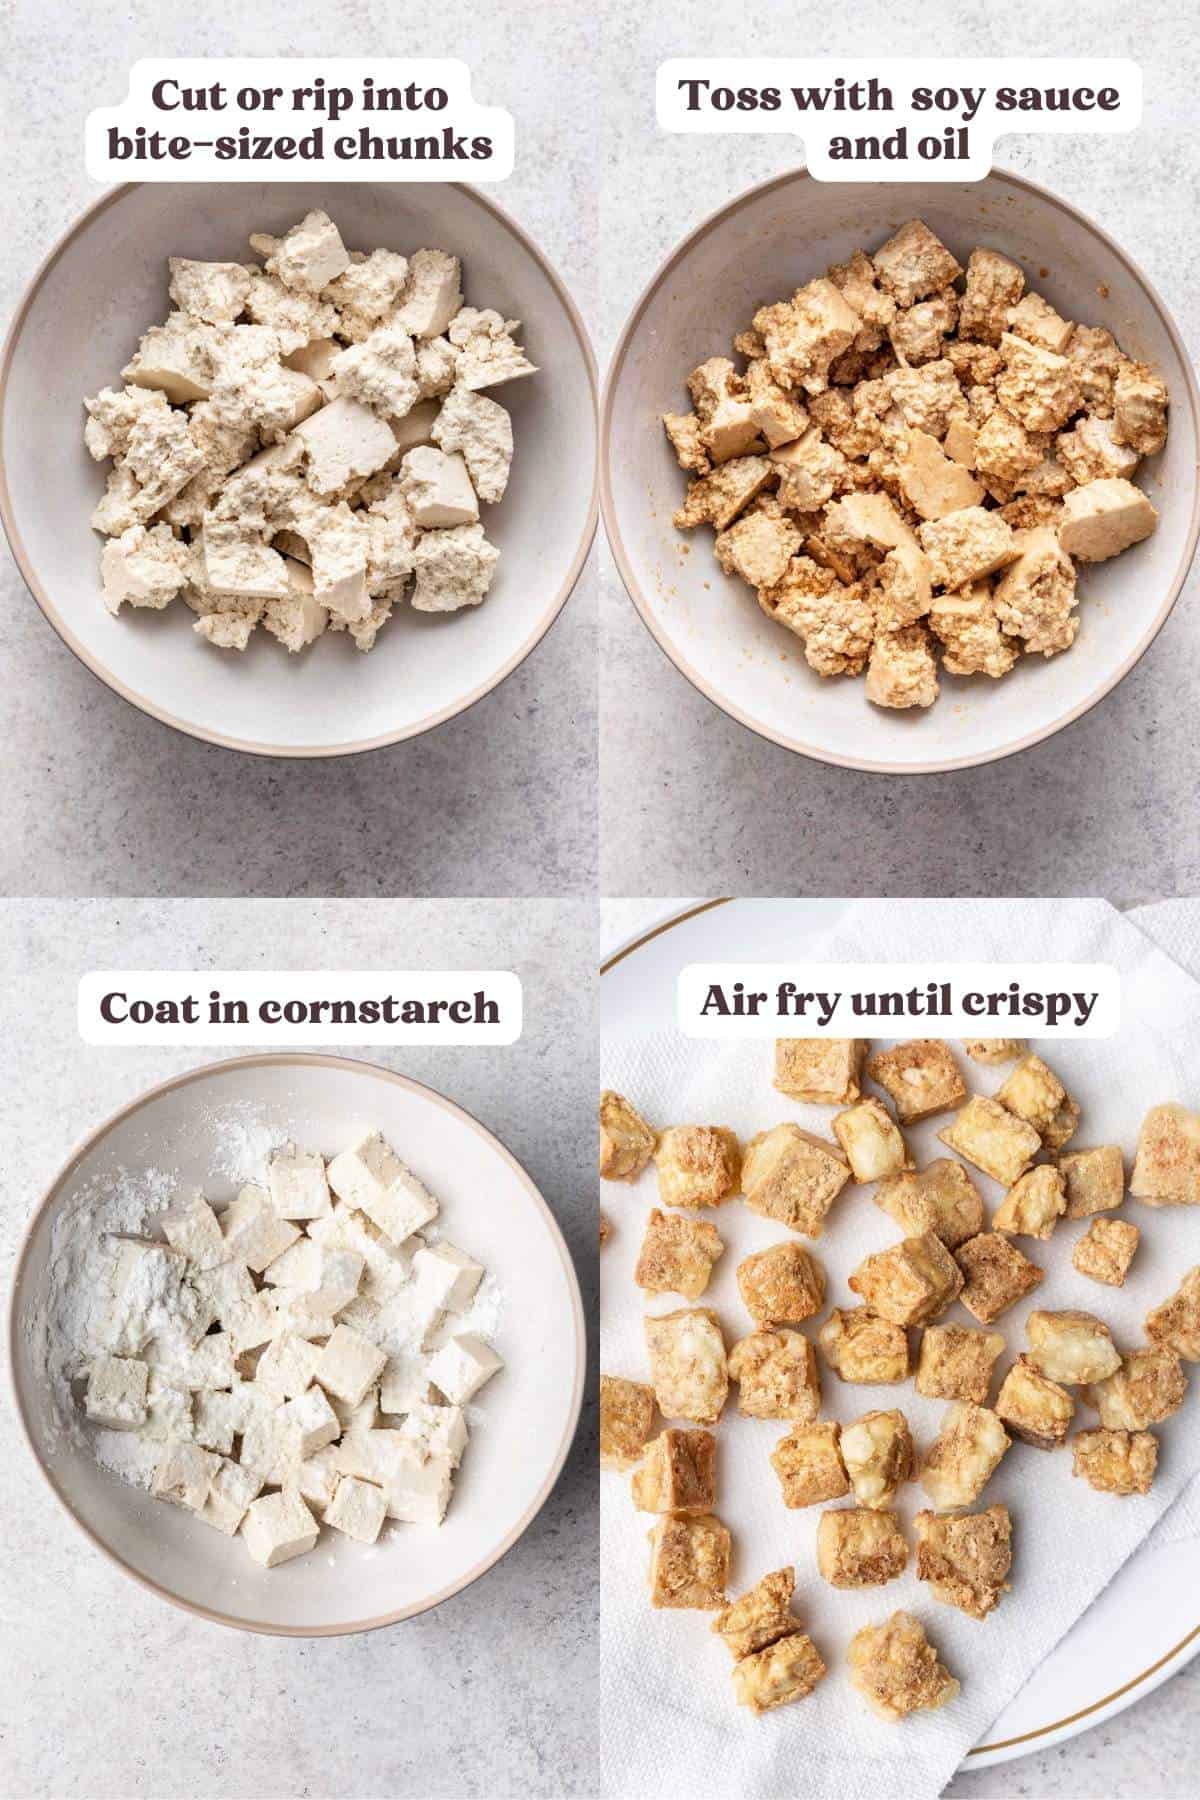 4 images showing step by step process of making crispy tofu.